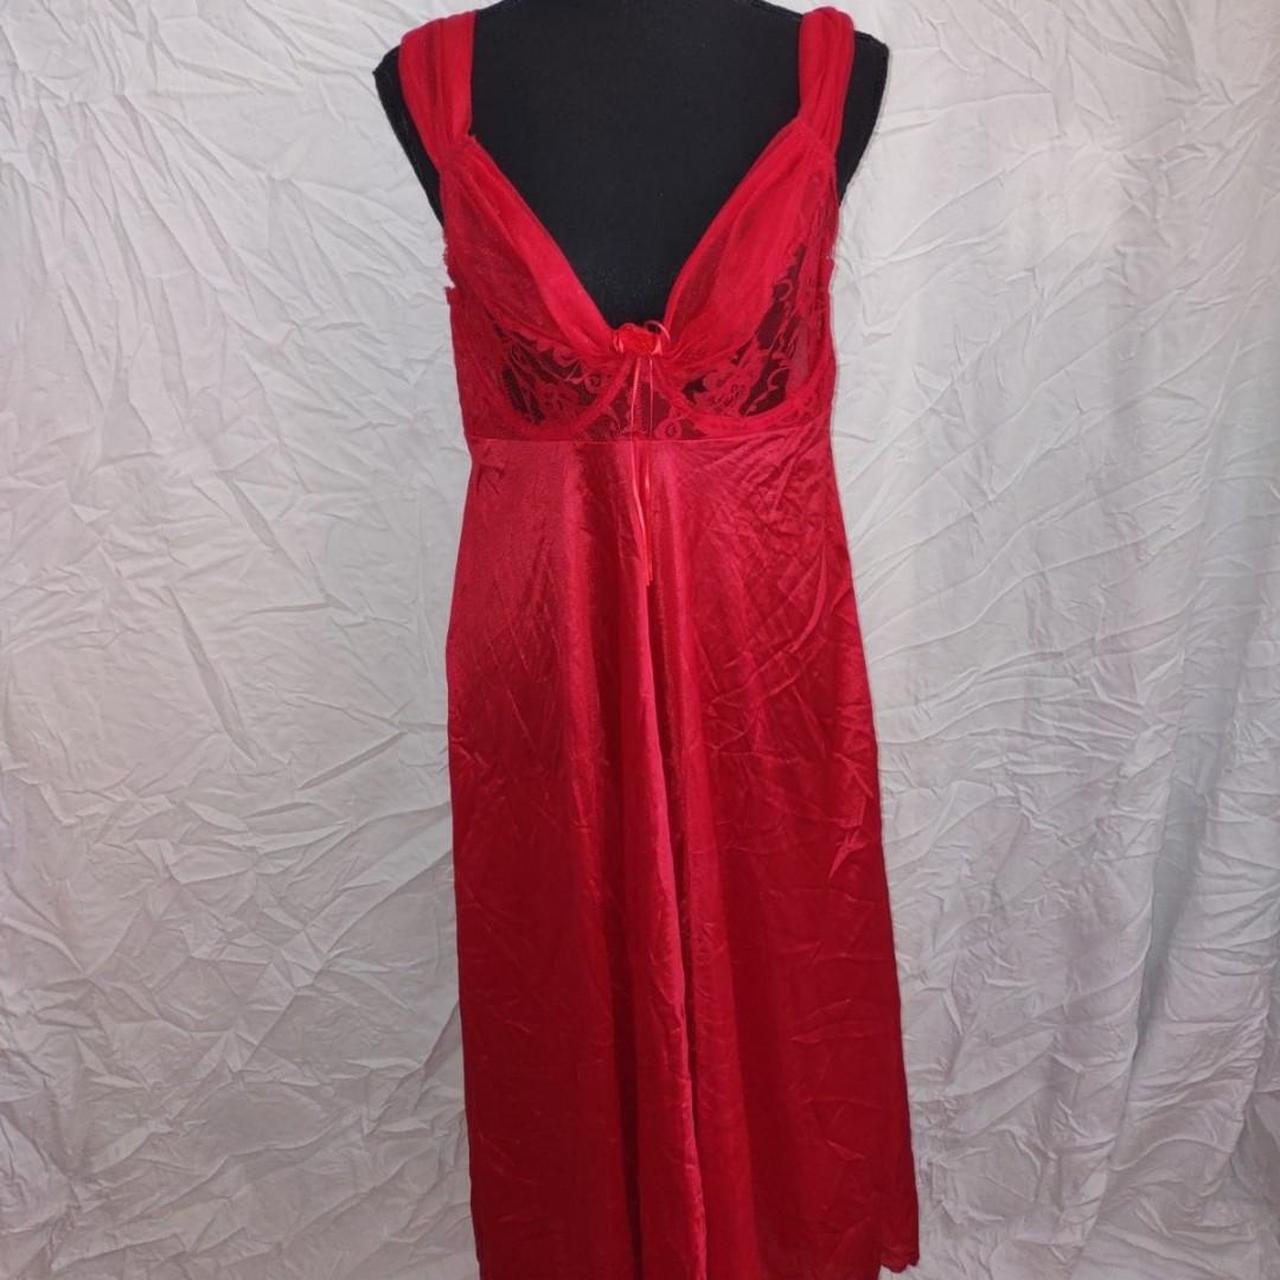 Product Image 2 - Red Vintage Vampire Gown

Beautiful vintage